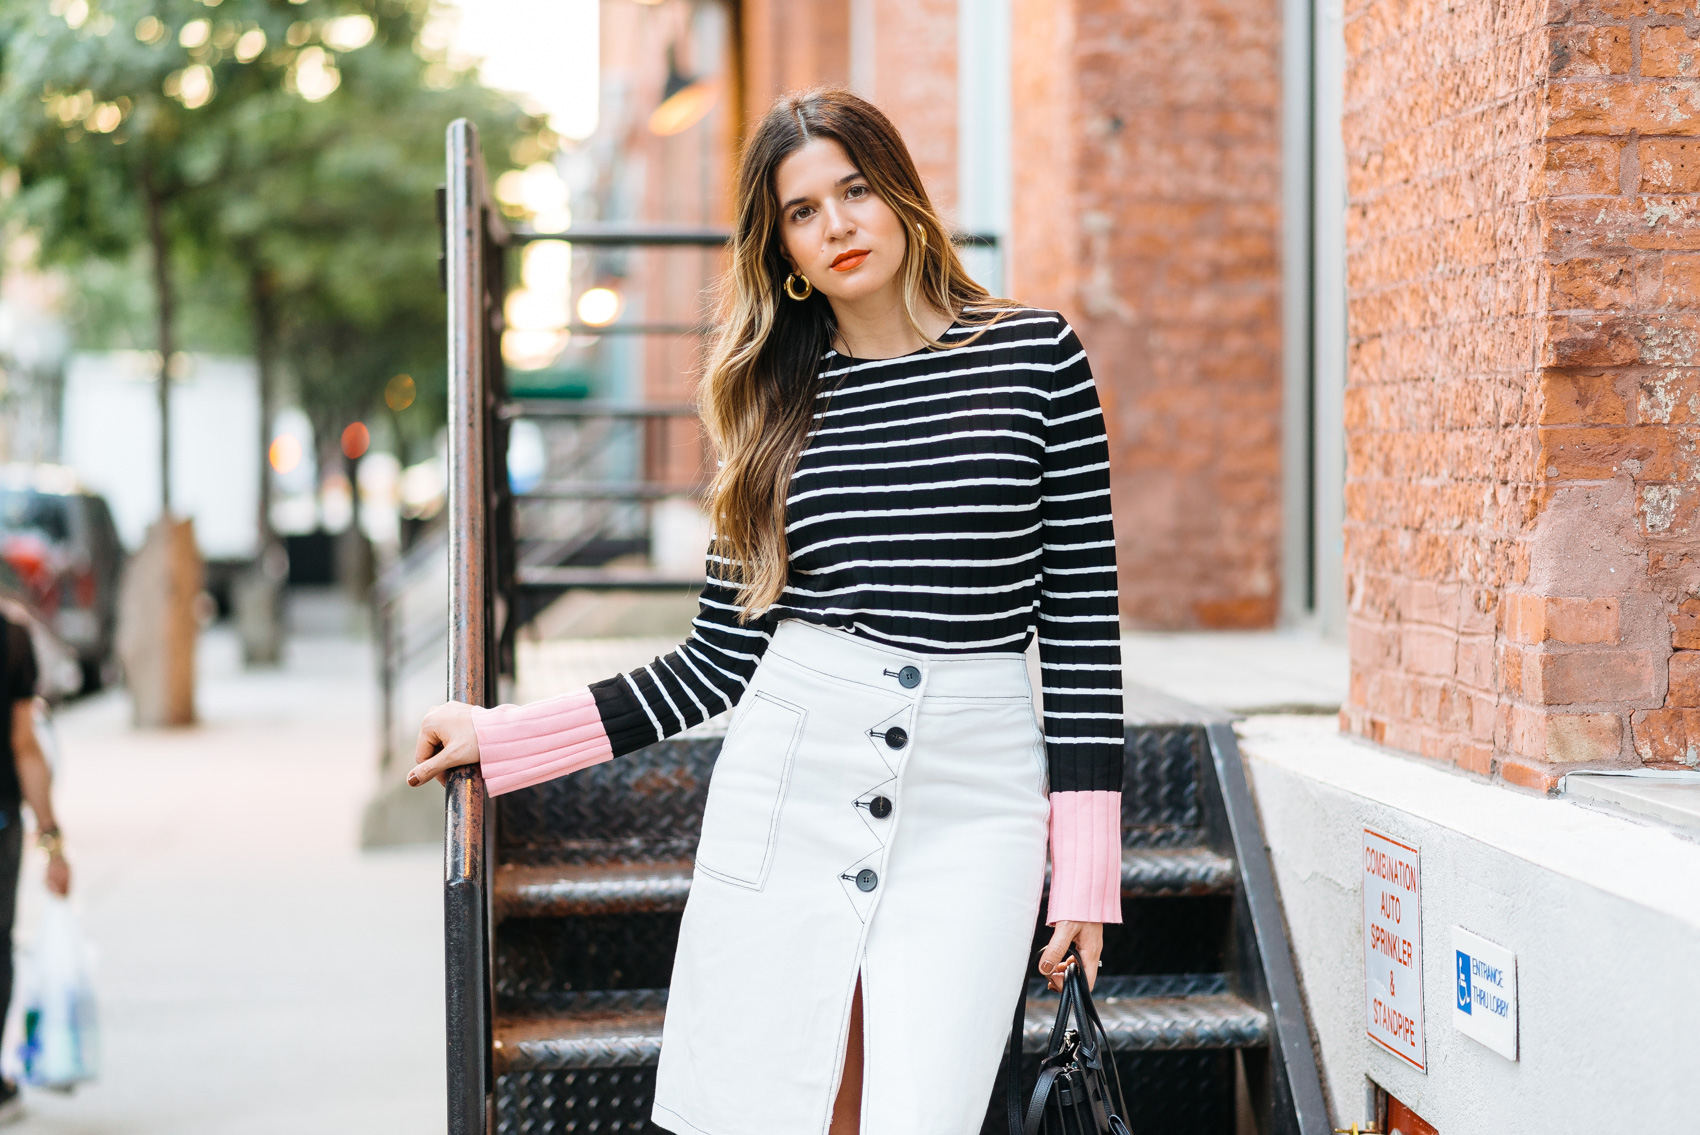 Maristella in a stripe sweater from Zara with pink flared sleeves and skirt from Style Mafia